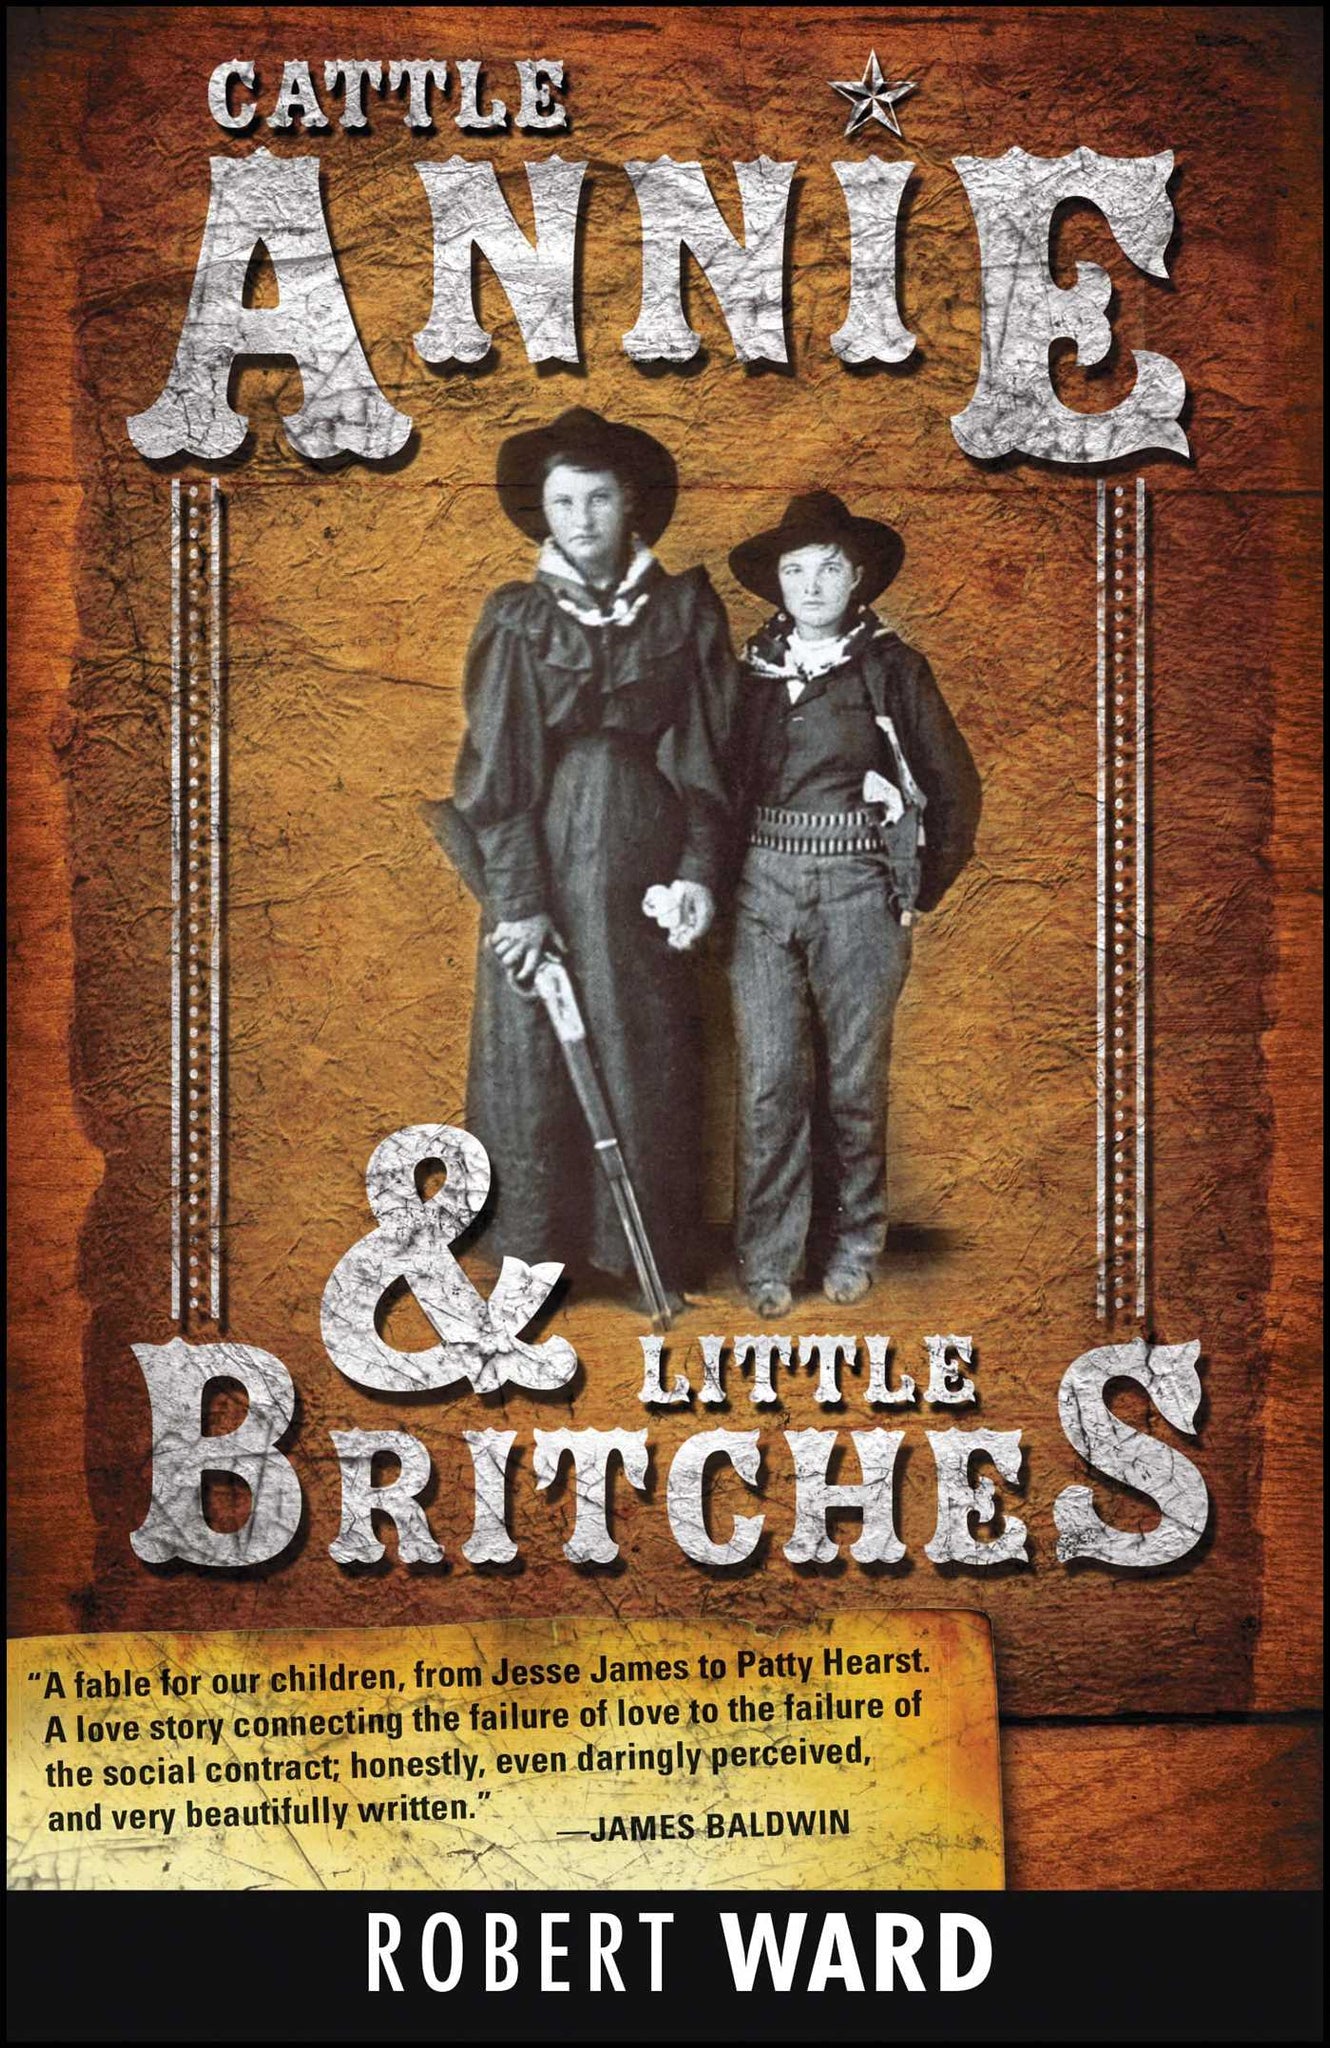 Cattle Annie And Little Britches